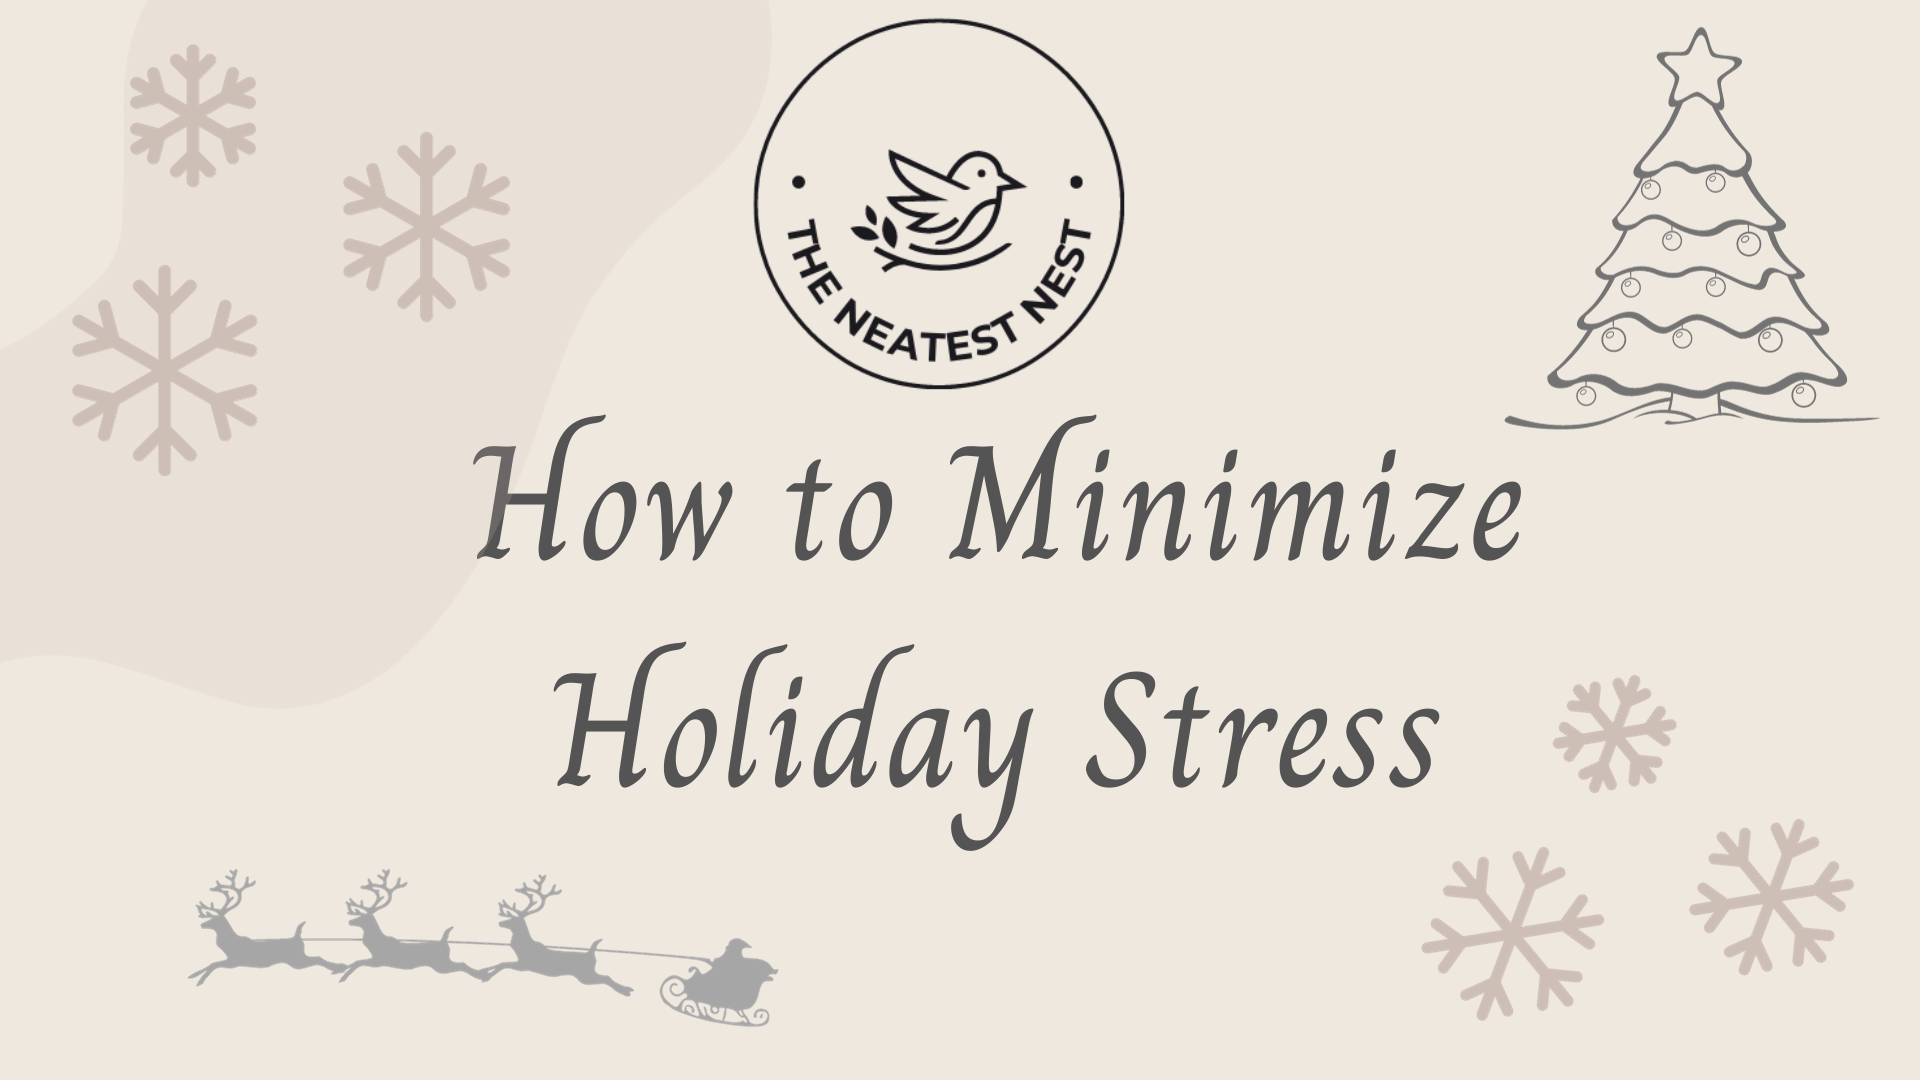 How to Minimize Holiday Stress